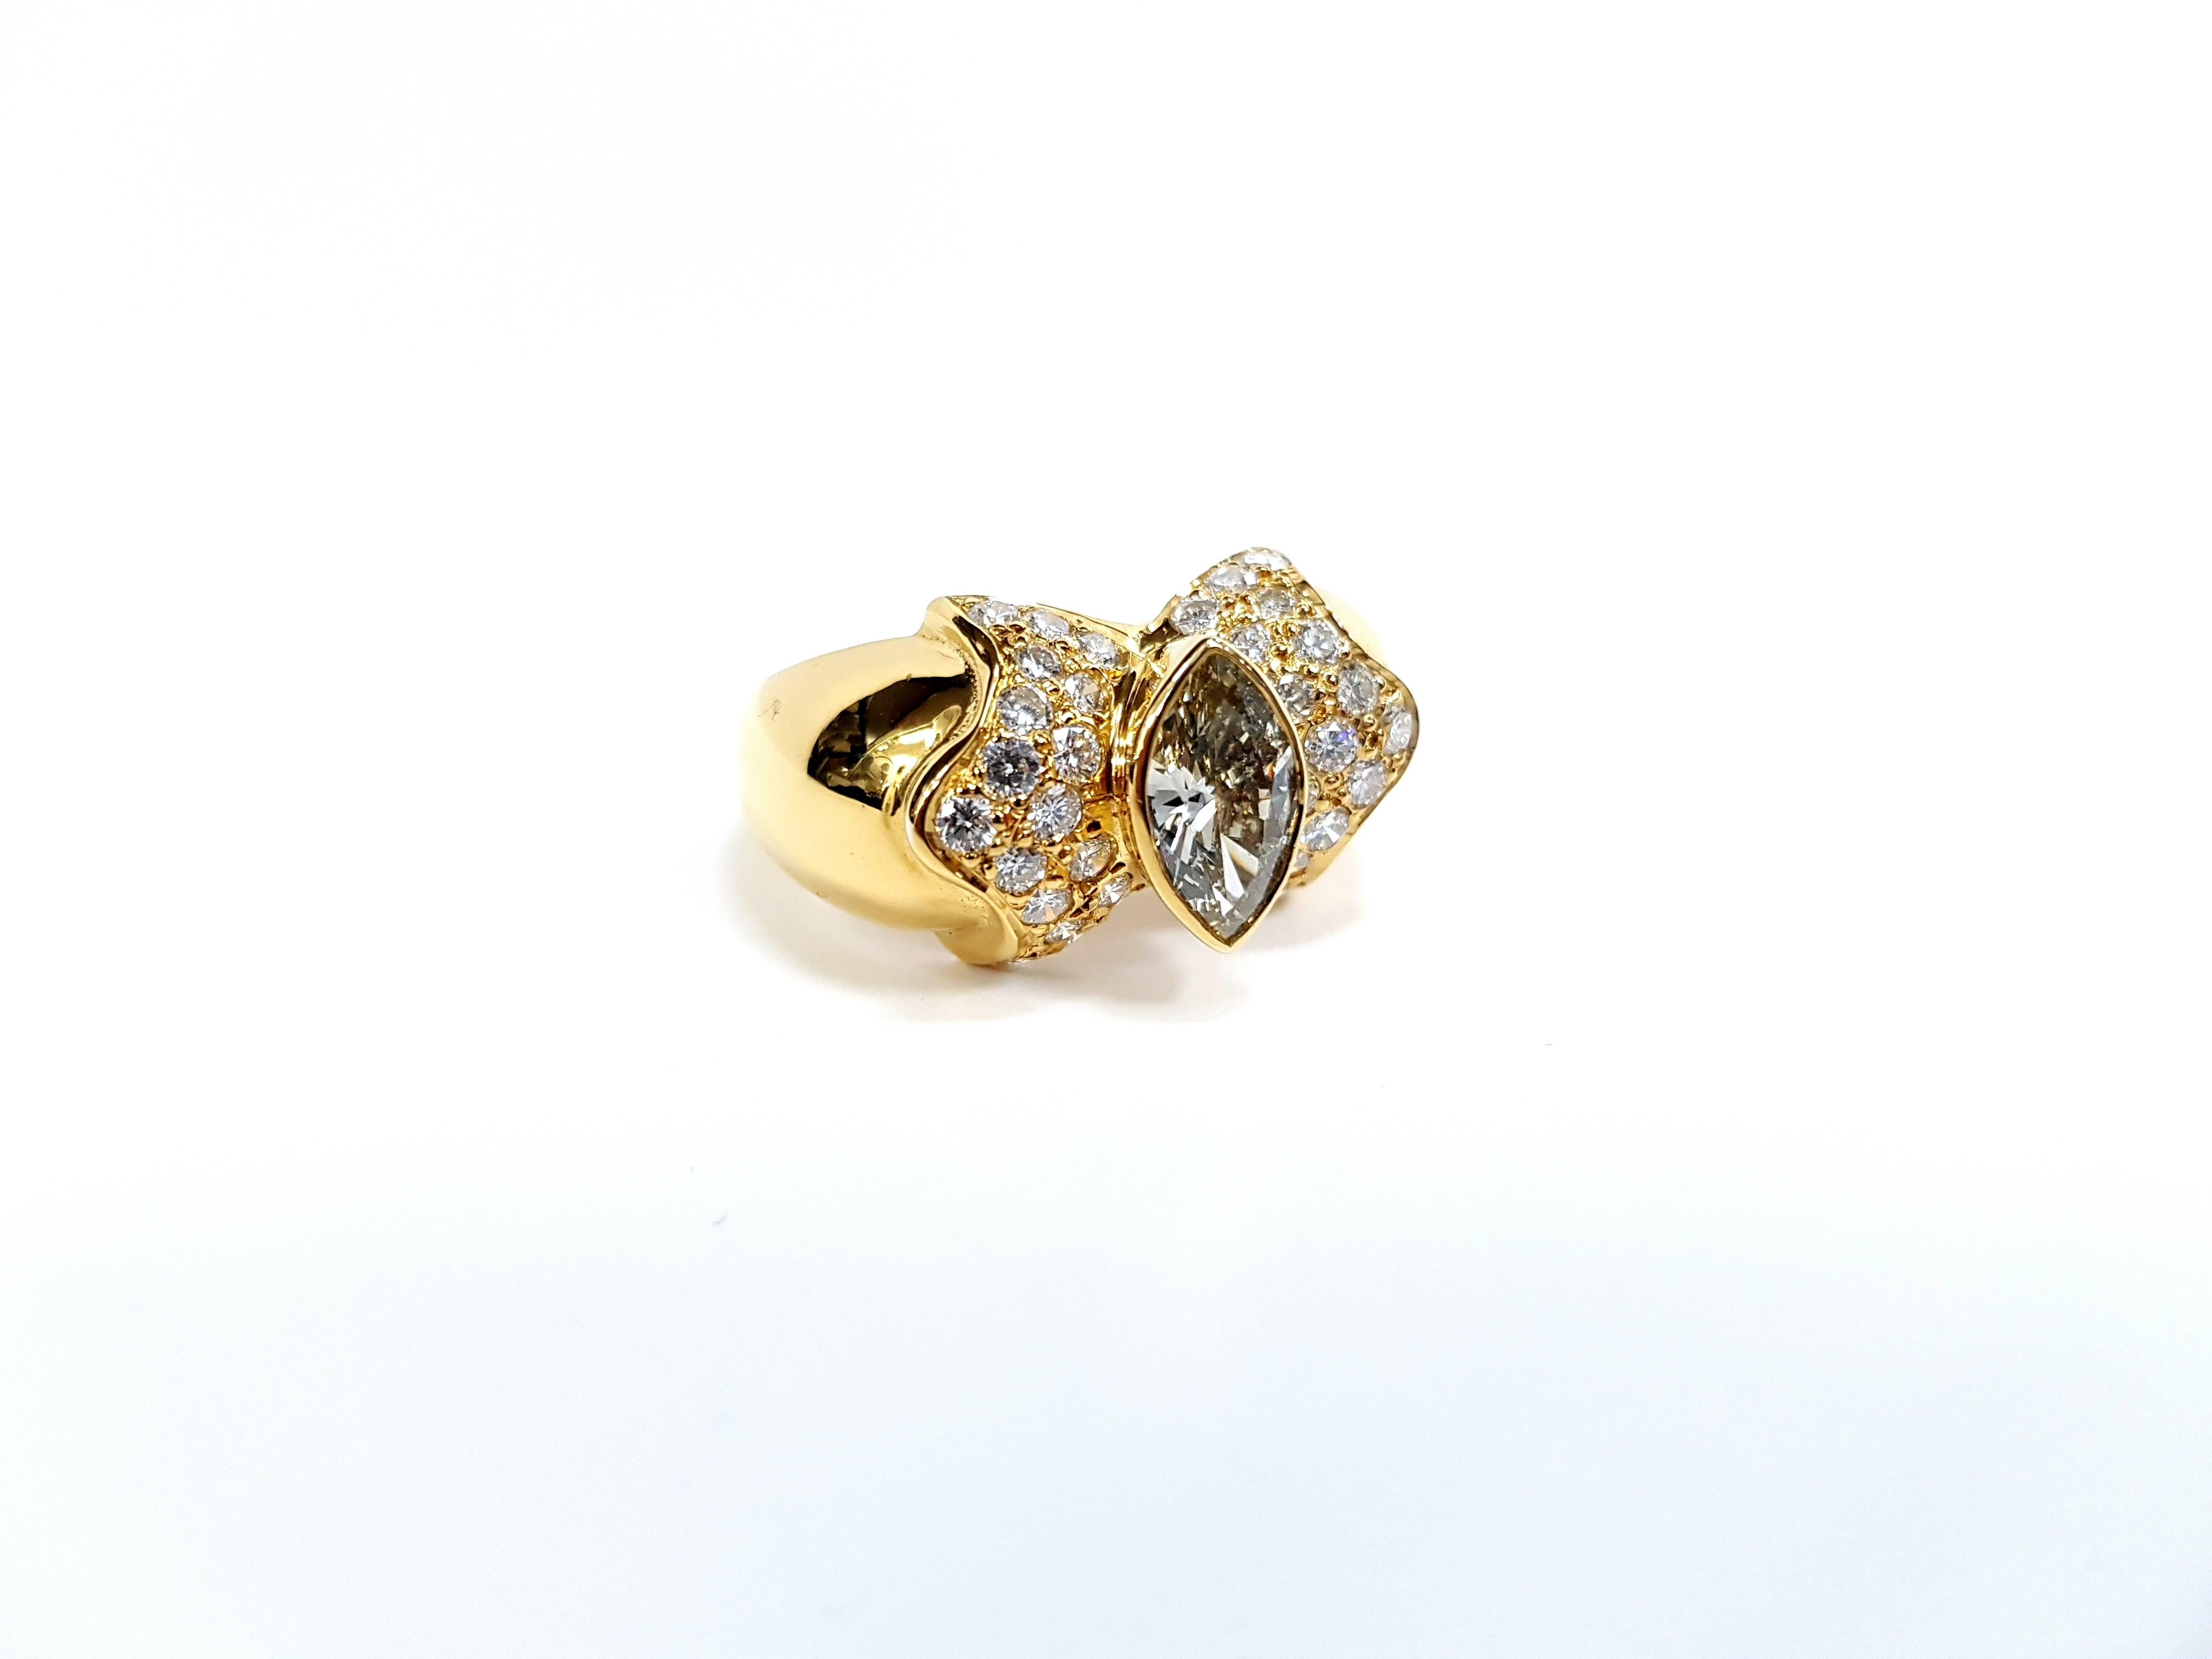 Vintage Diamond Marquise Round Brilliant Cut Cocktail Ring Yellow Gold.
Unique diamond bow tie style ring, with round brilliant cut diamonds set in 18k yellow gold. The main stone is a marquise shaped diamond weighing approximately 0.95 - 1.10